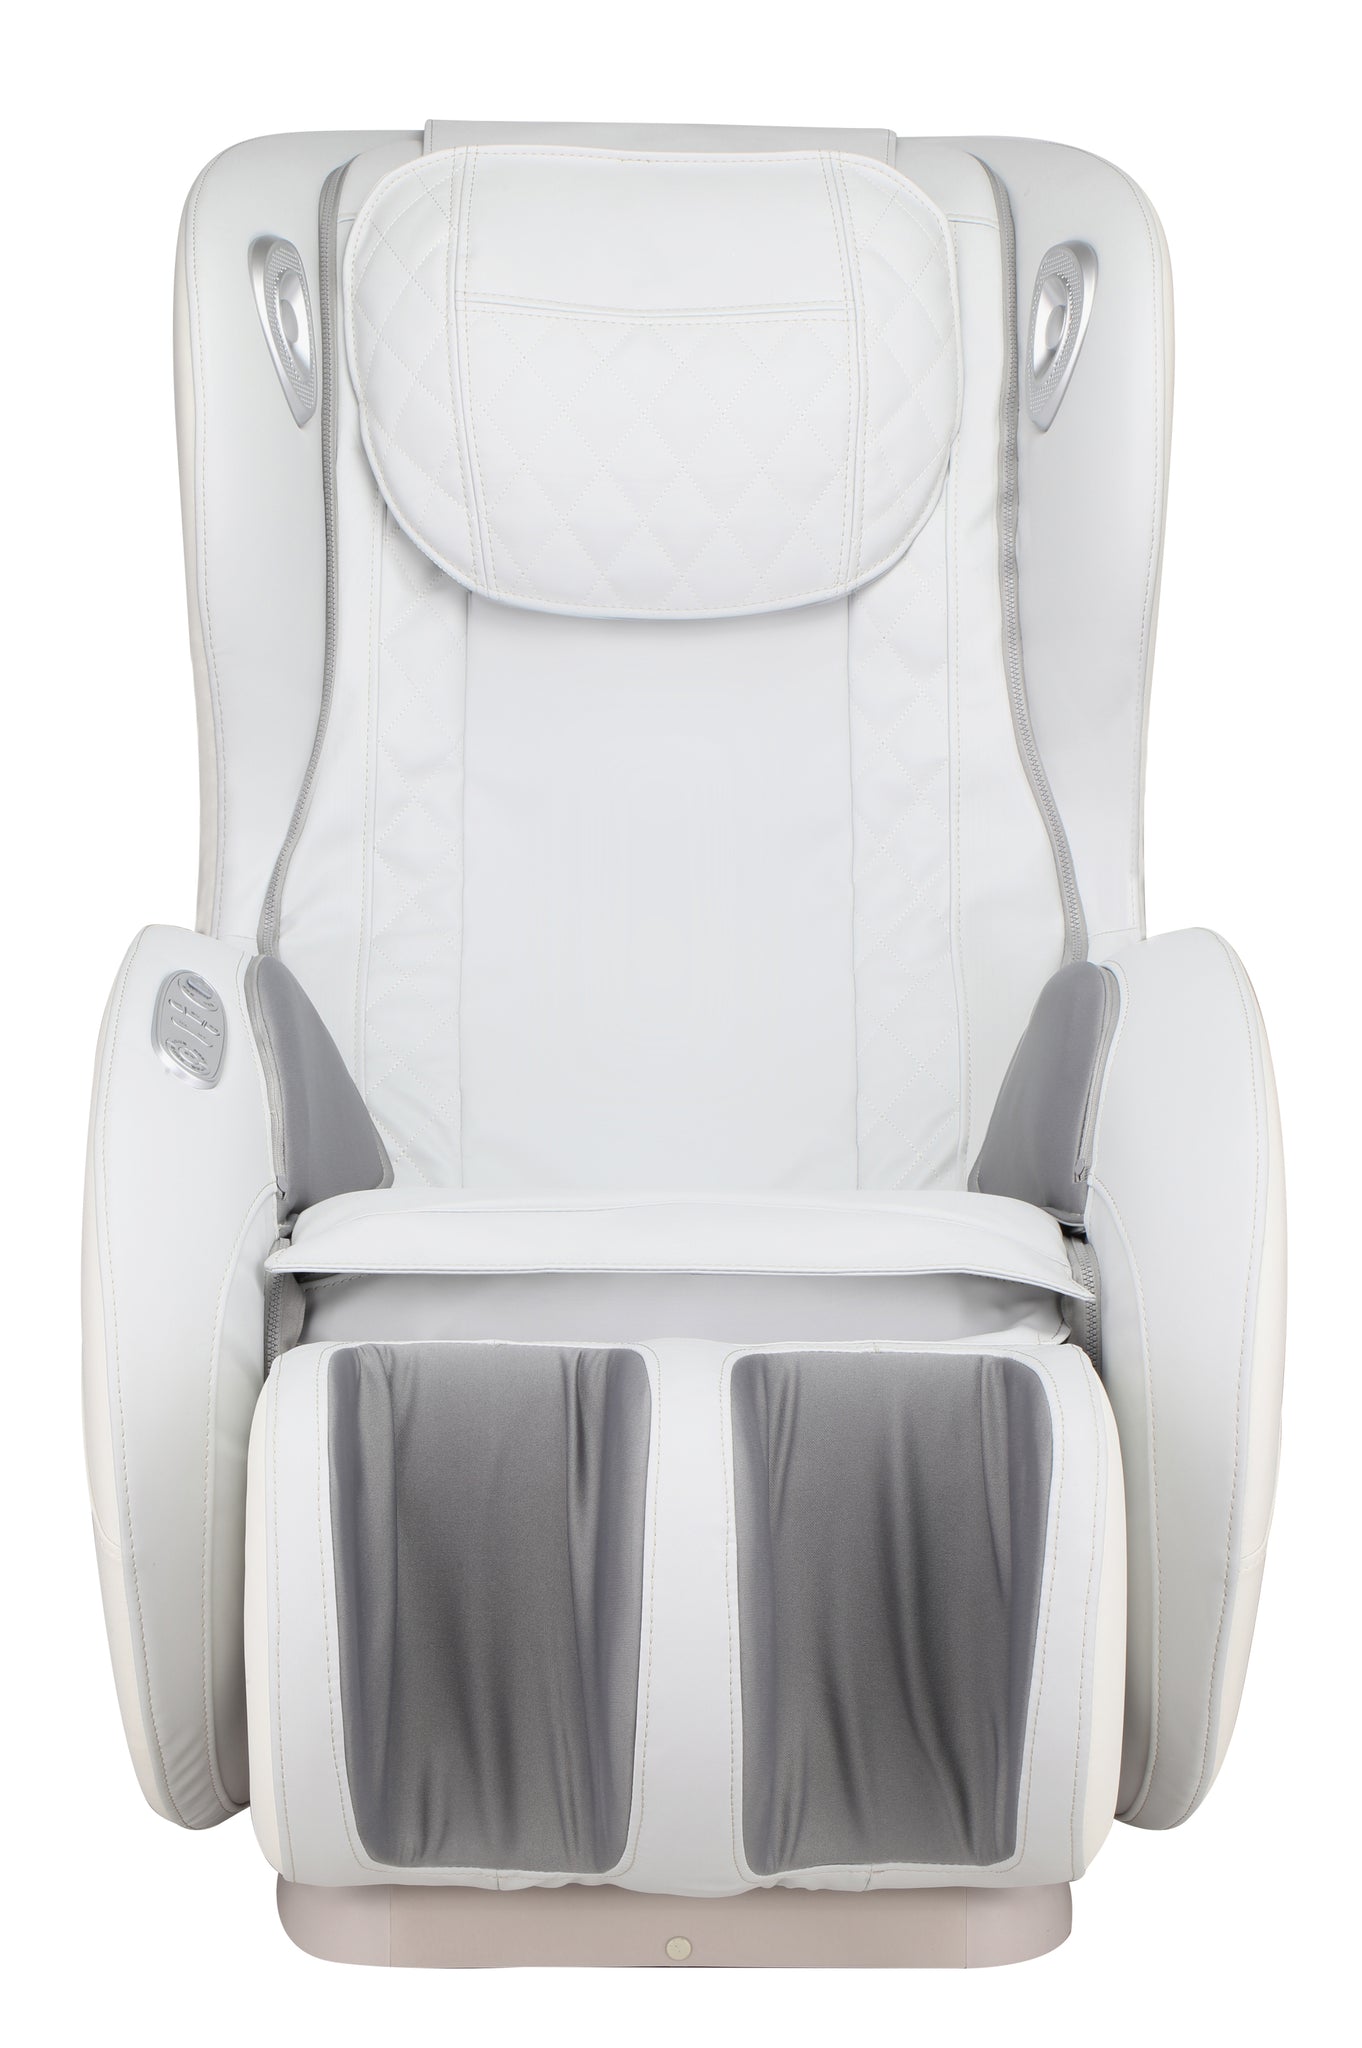 Massage Chairs SL Track Full Body and Recliner beige-pu